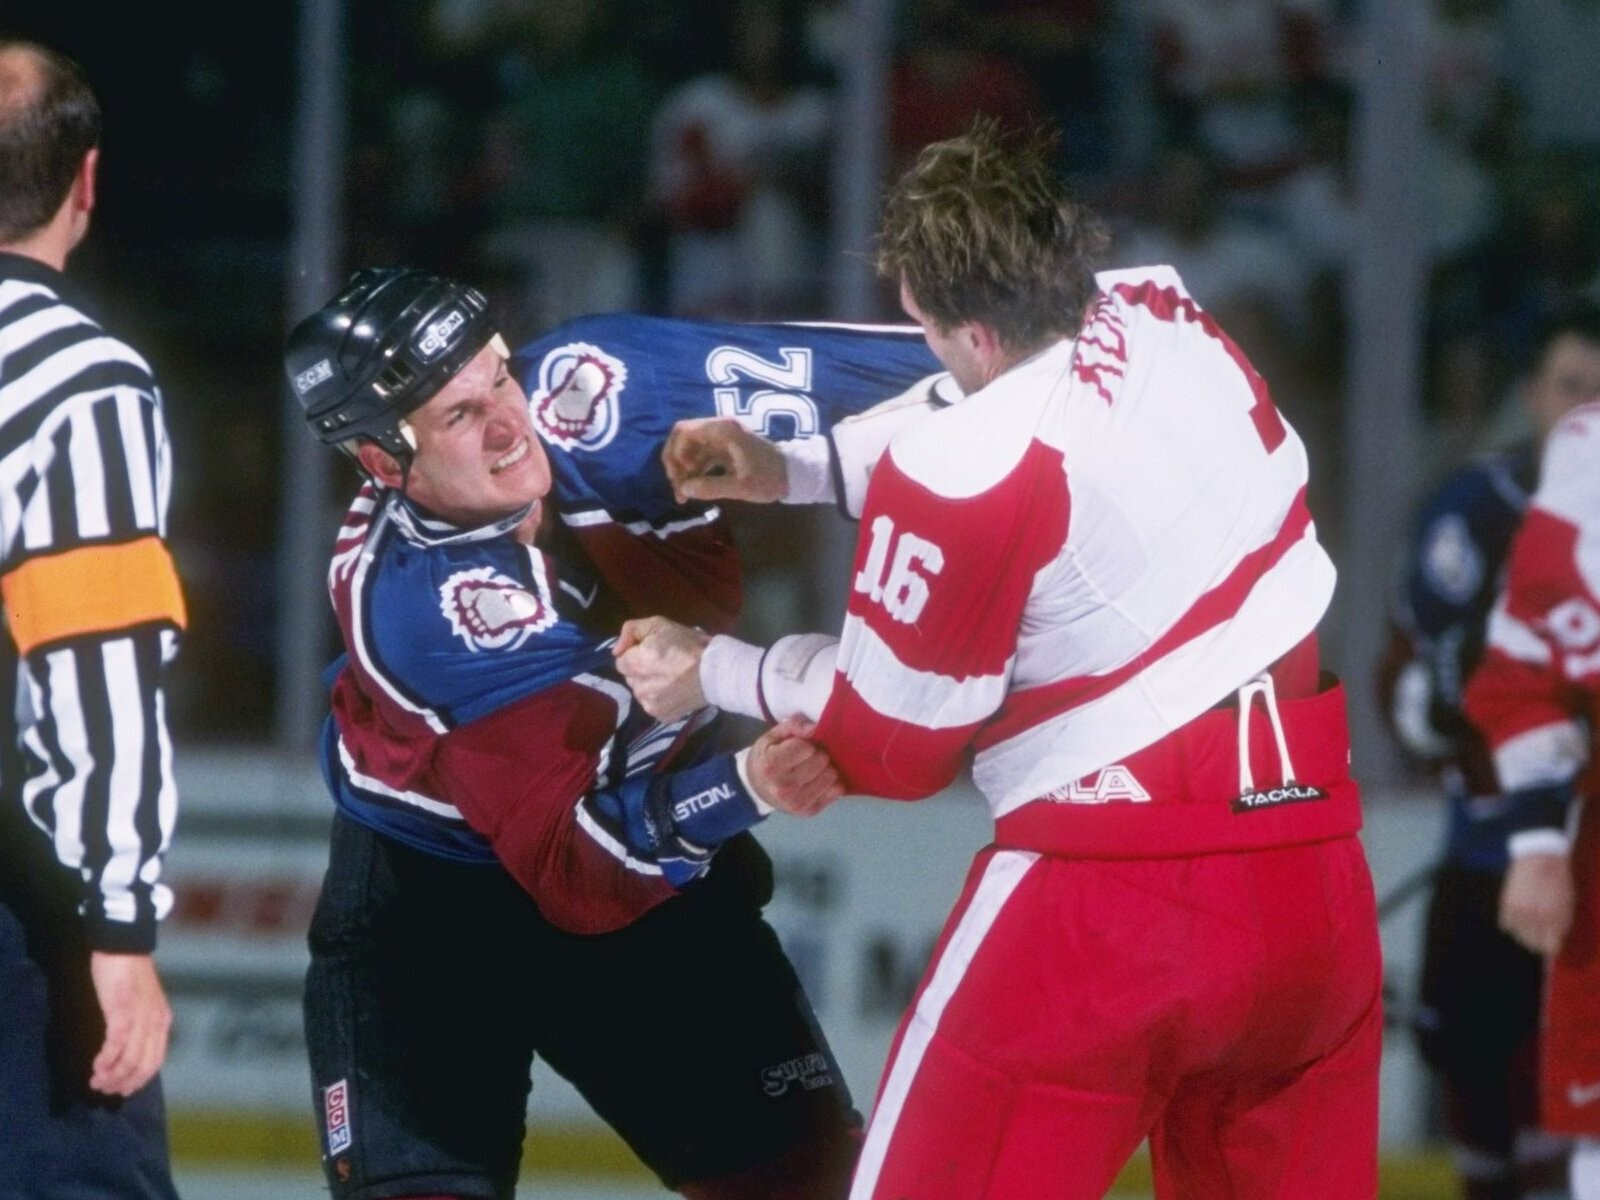 MUST SEE: Darren McCarty says Peter Forsberg still hates Detroit! - Red  Wings Feed